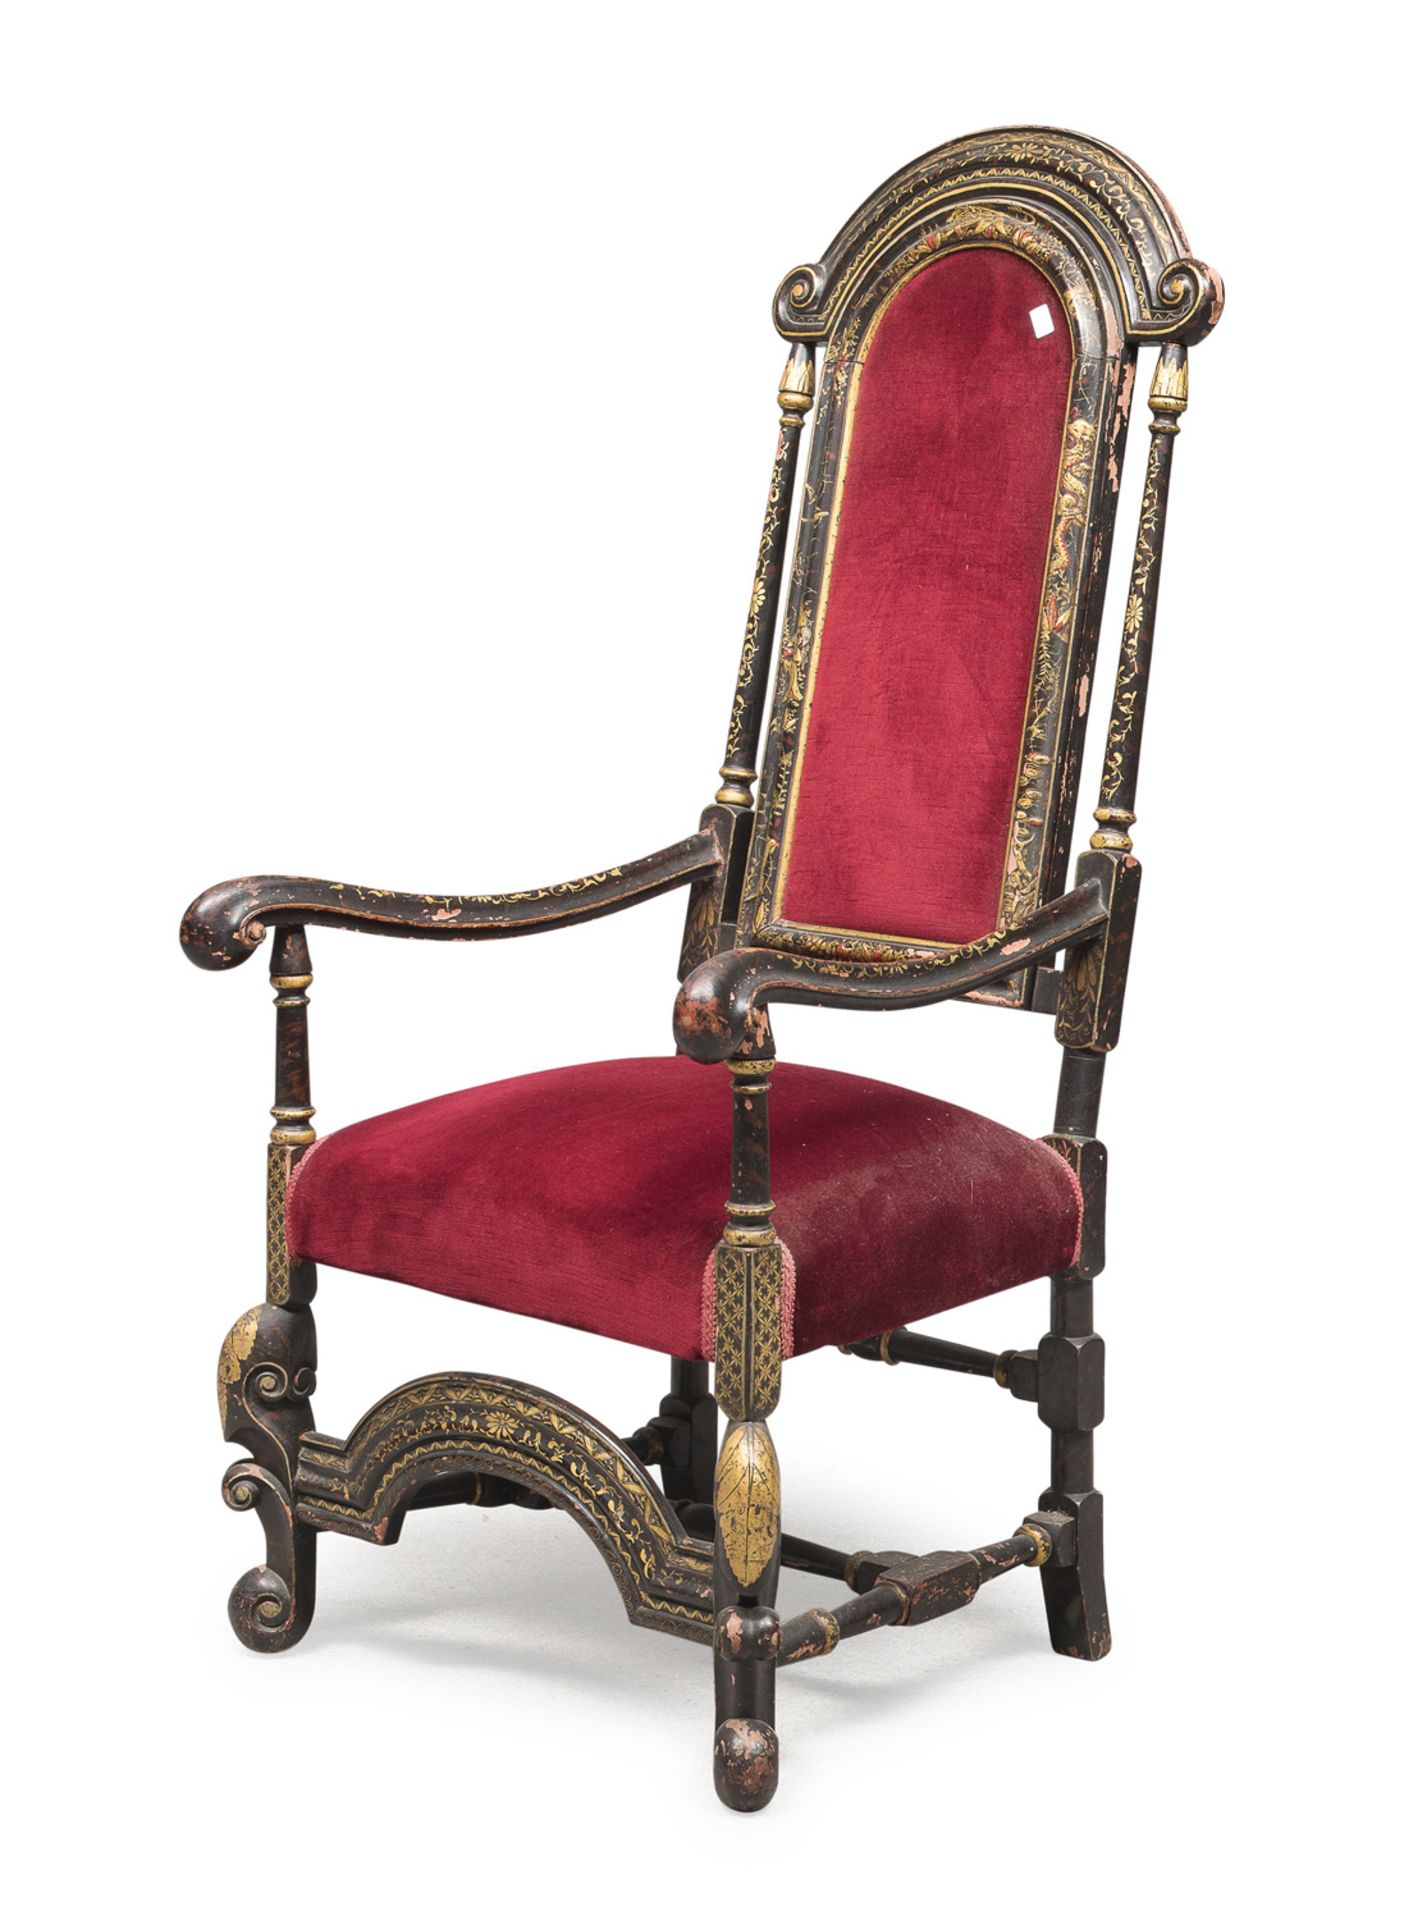 ARMCHAIR IN BLACK AND GOLD LACQUER WOOD FRANCE 19th CENTURY